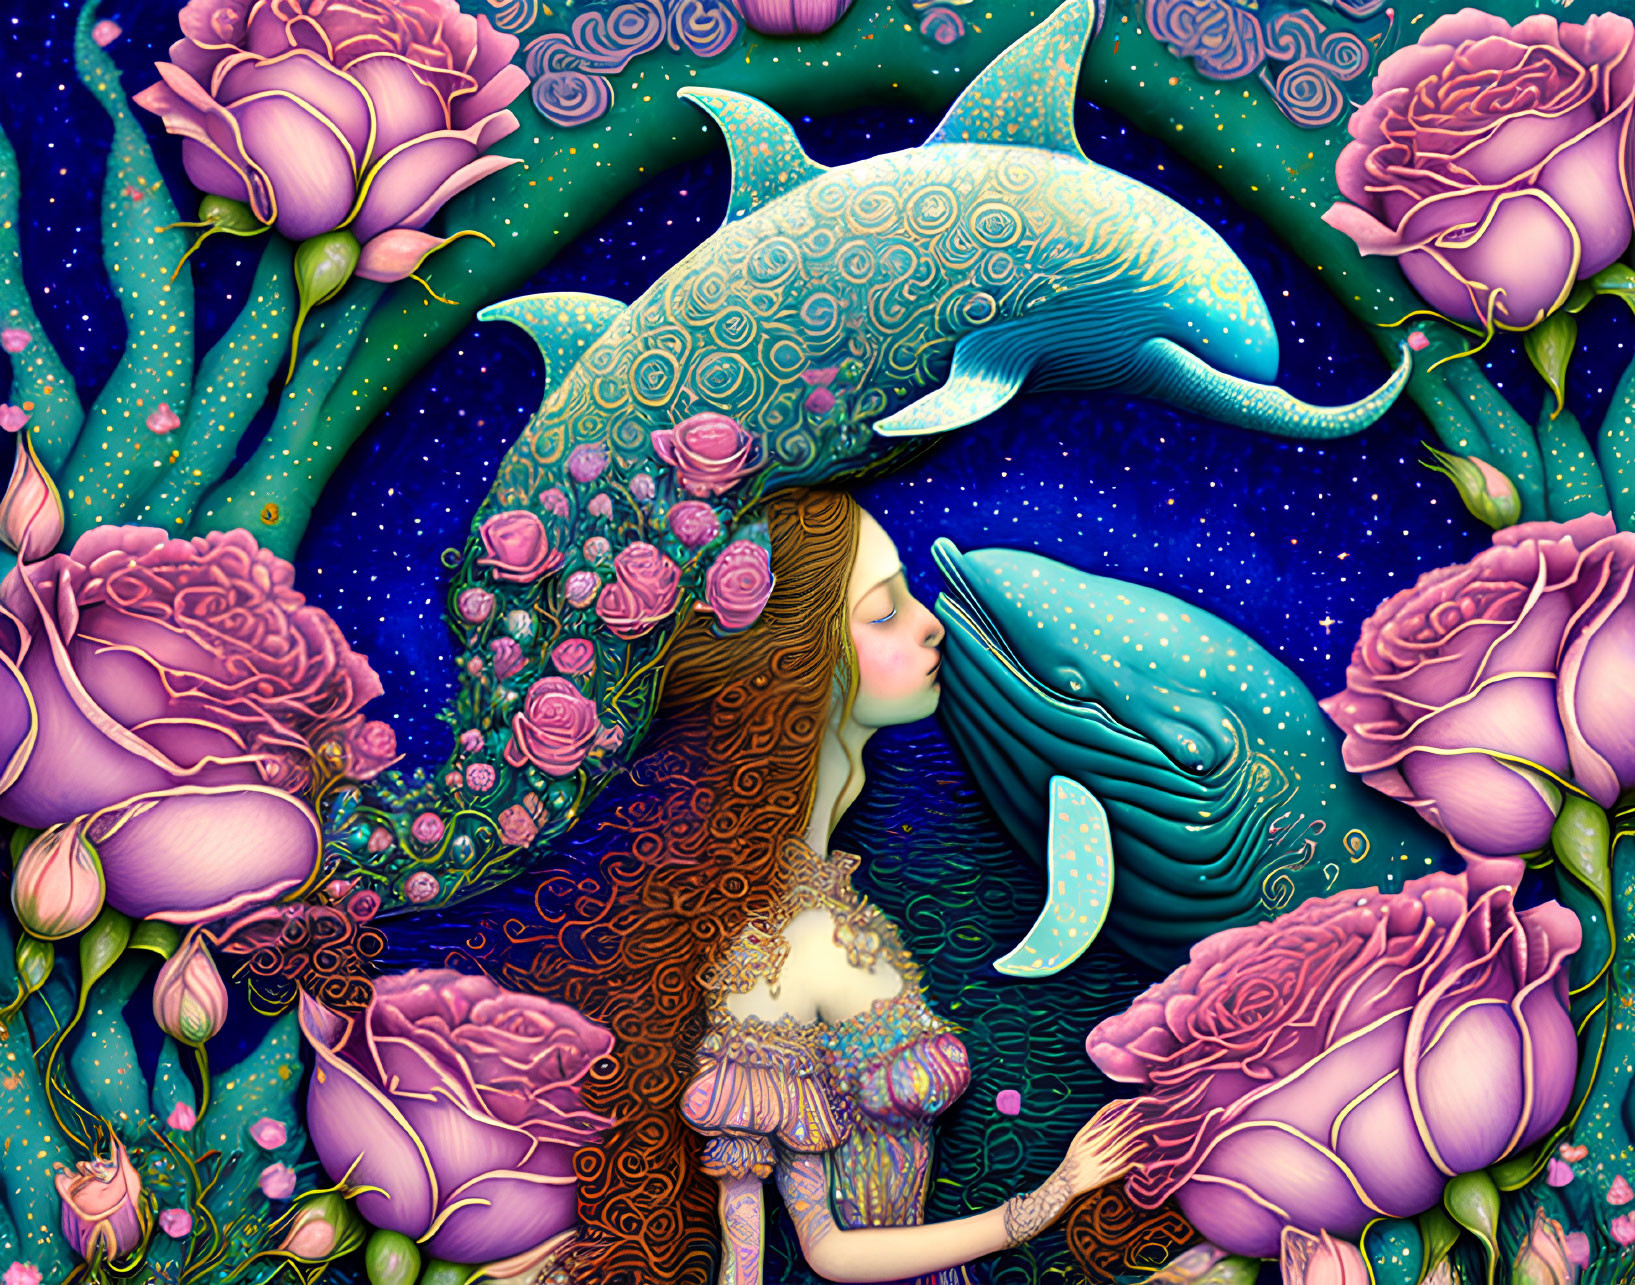 Illustration of Woman with Floral Motifs, Roses, Whales, and Starry Sky